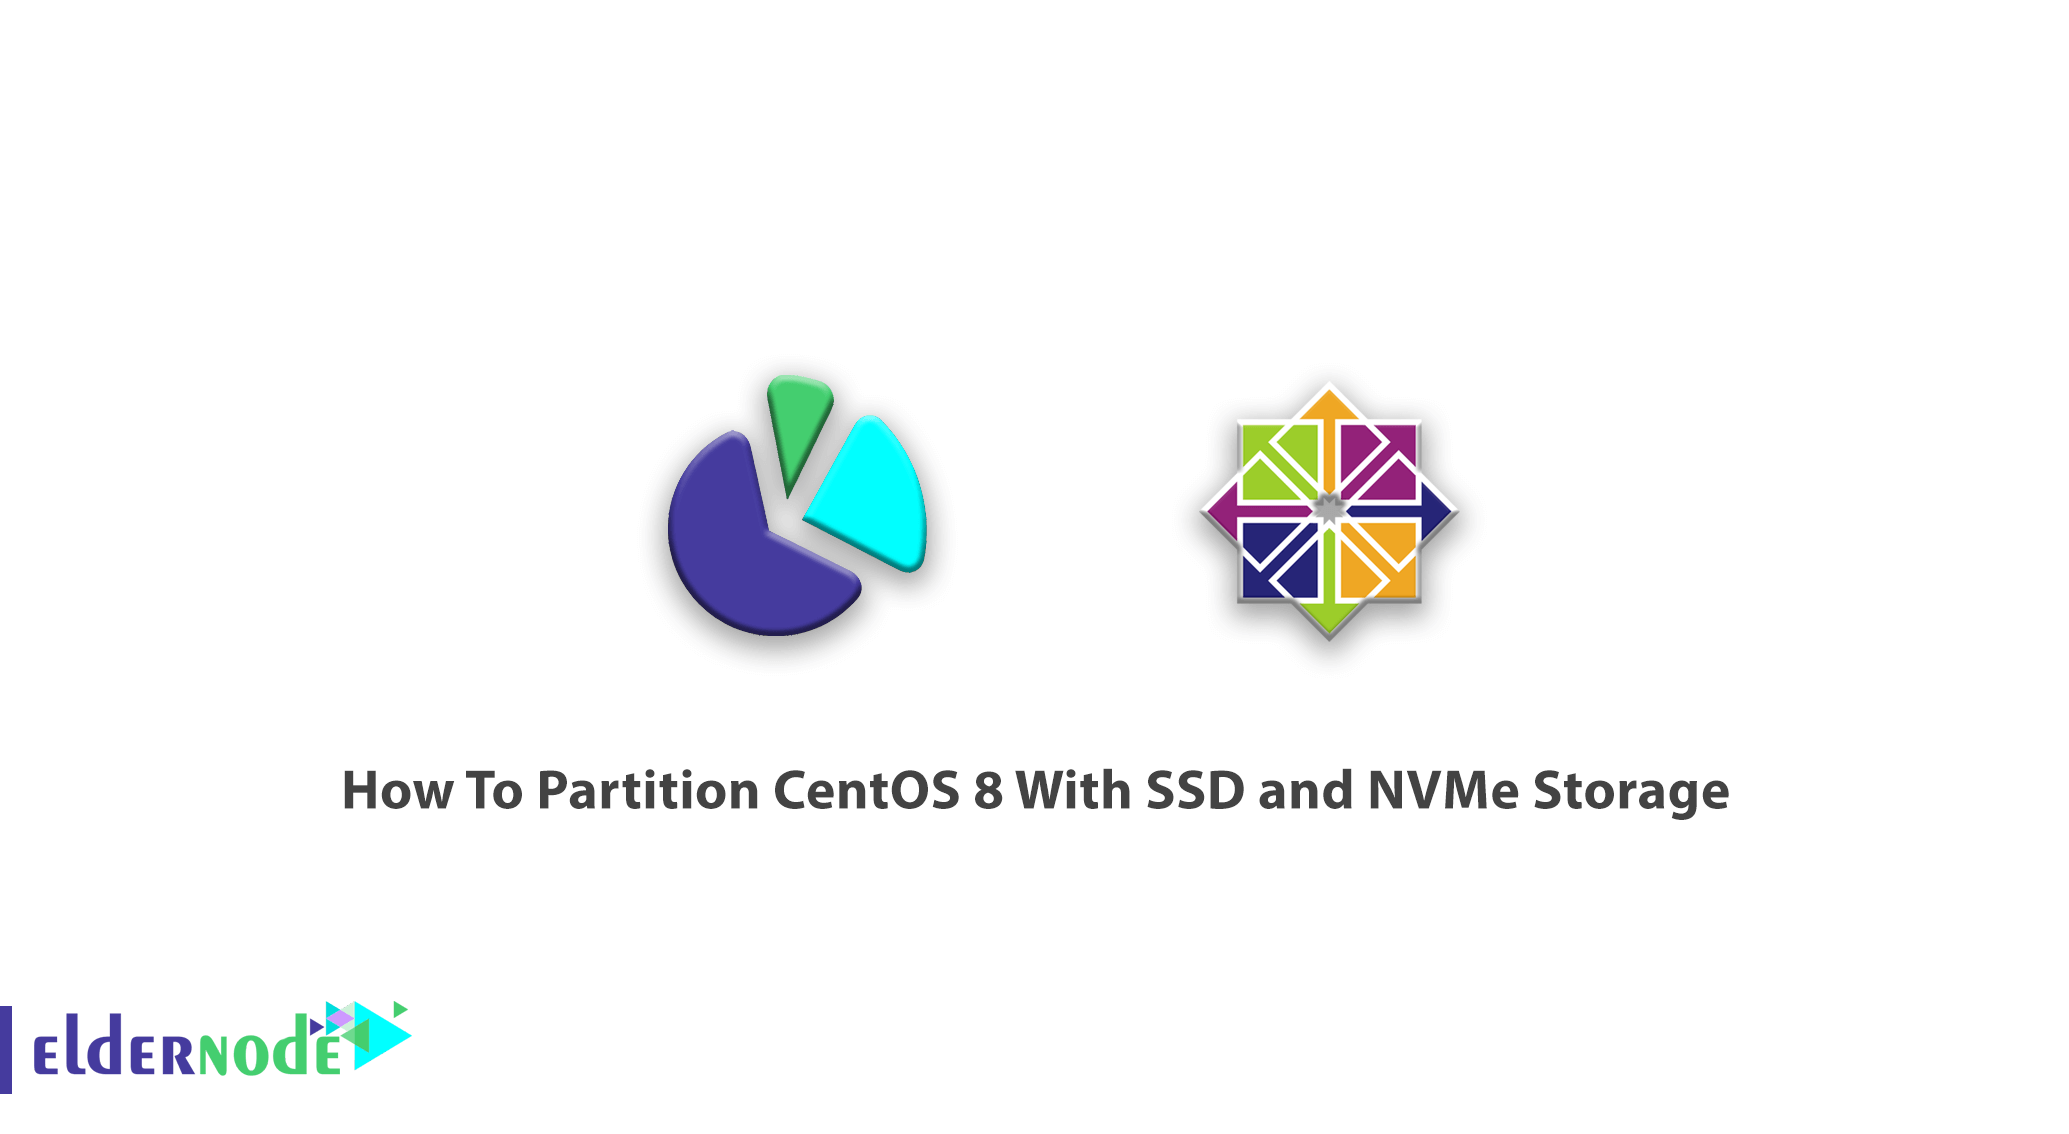 How To Partition CentOS 8 With SSD and NVMe Storage